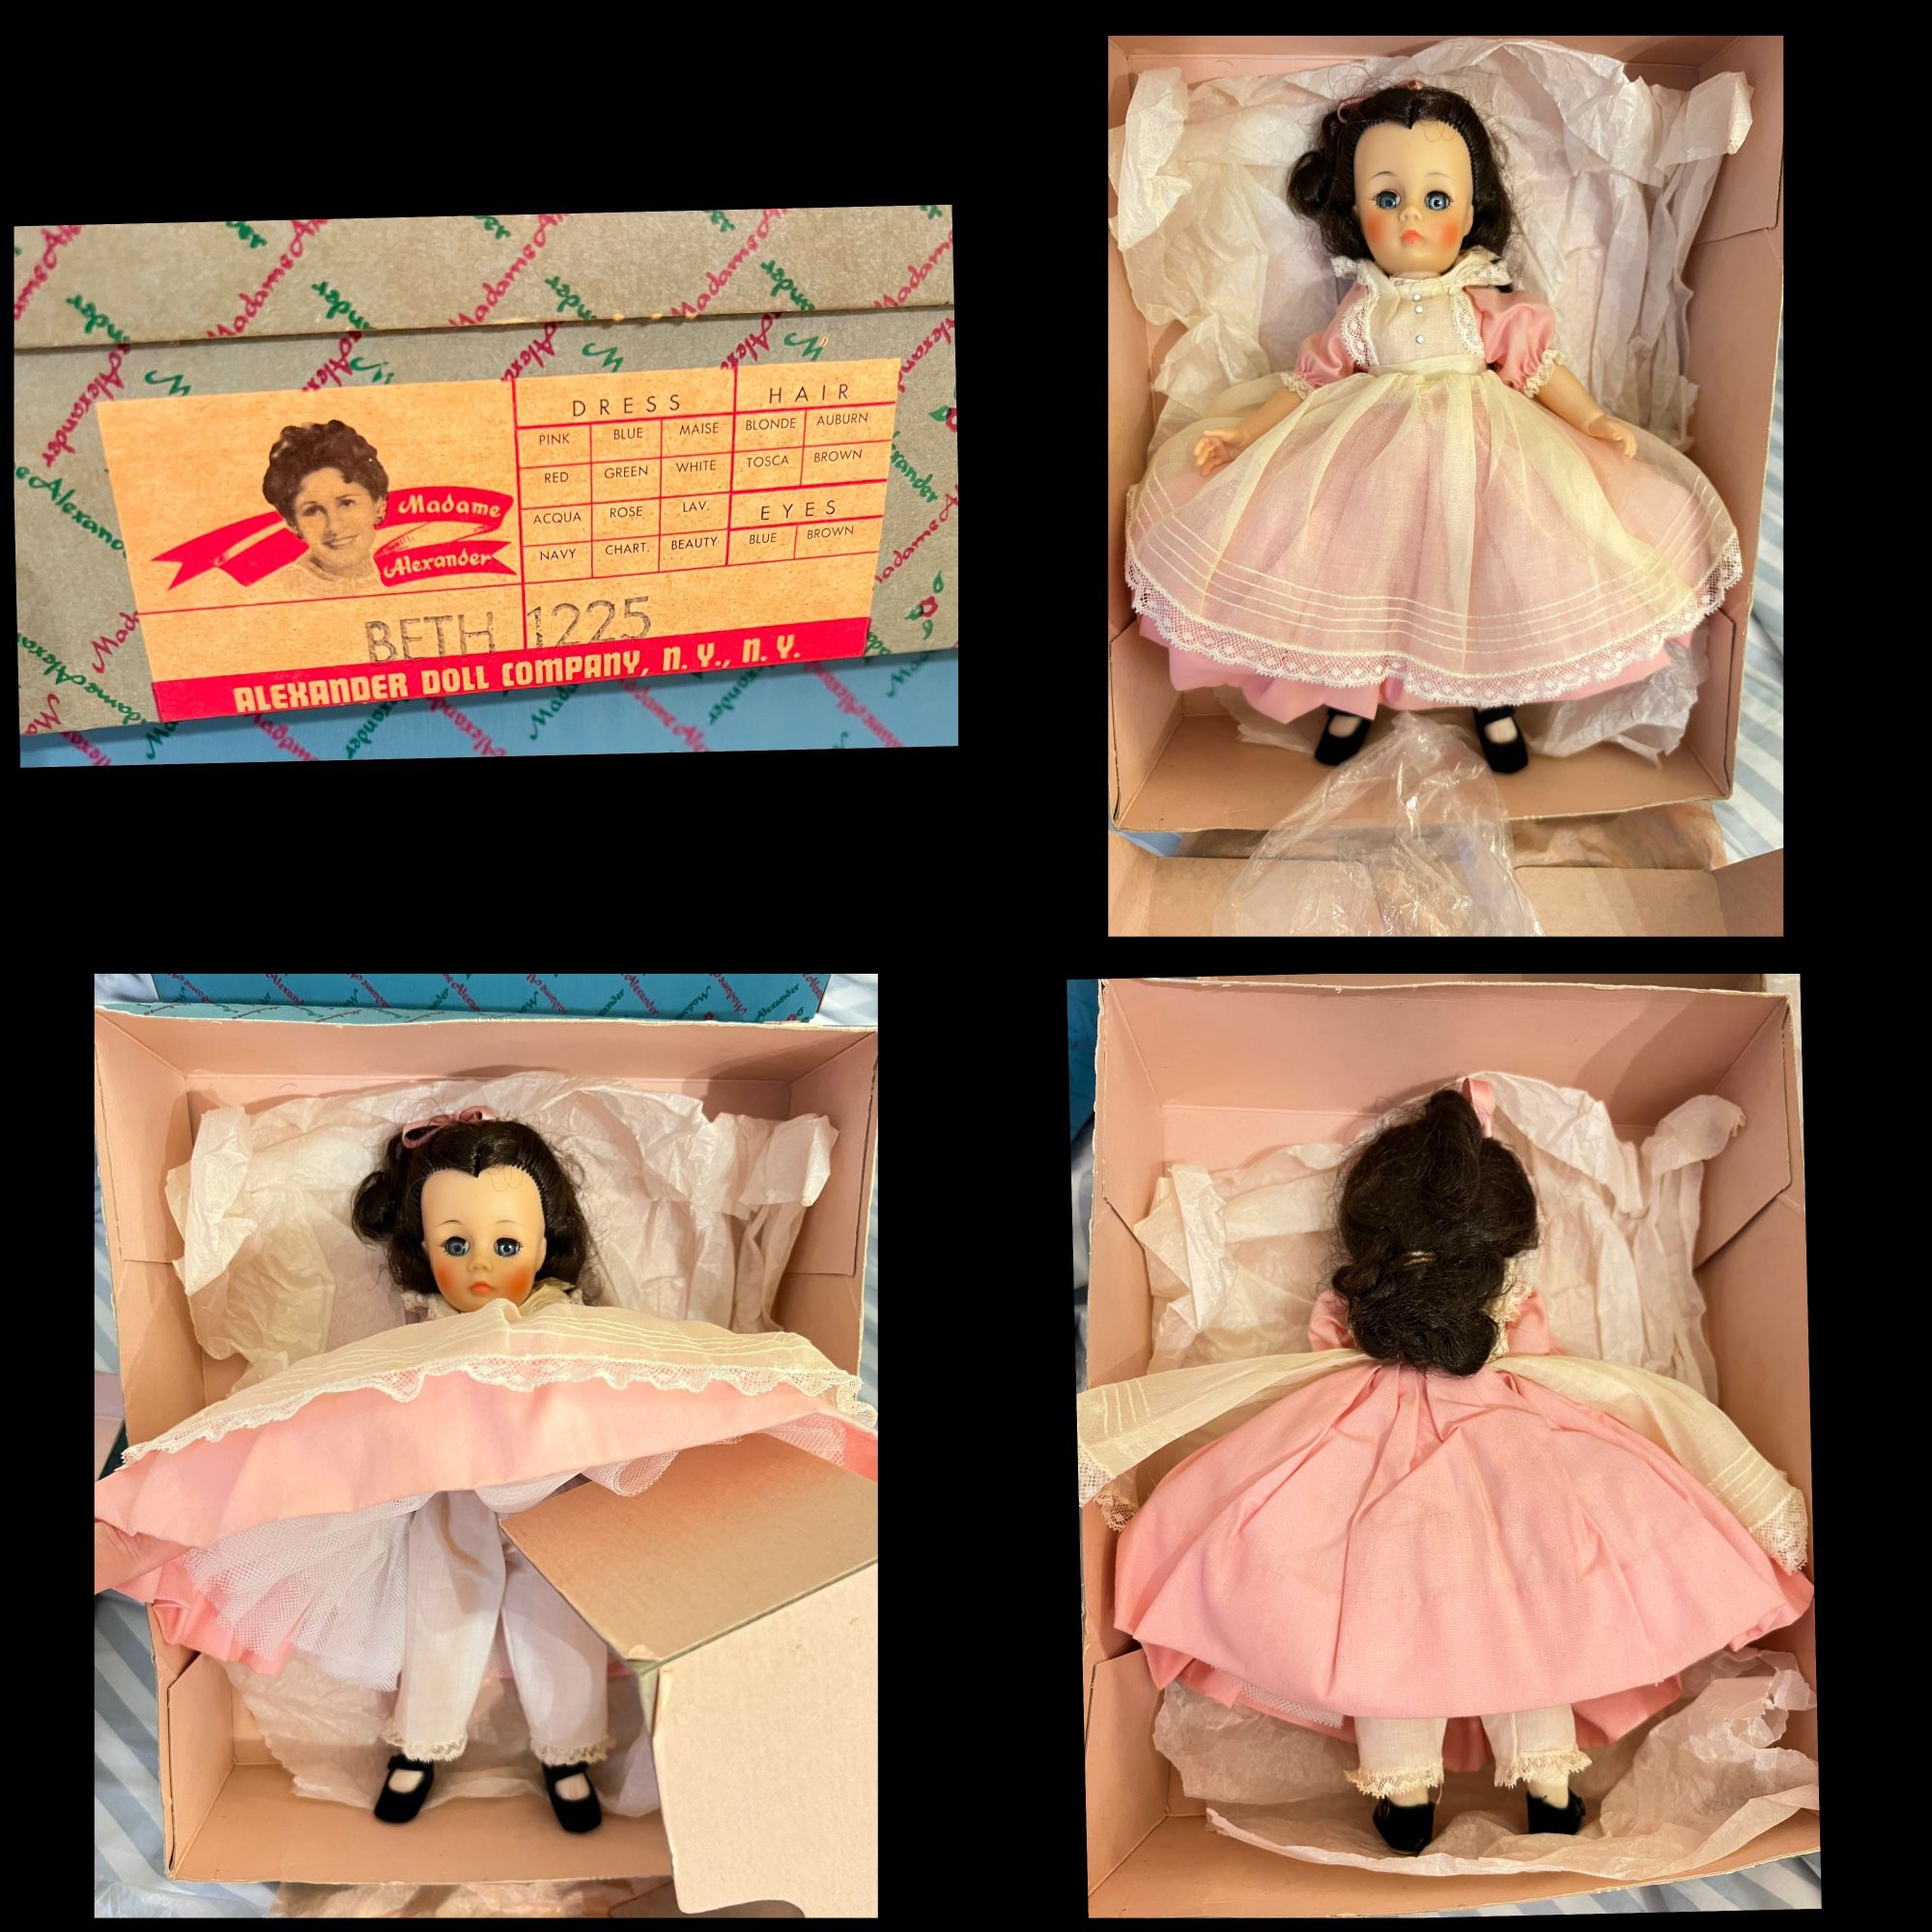 Little Women Beth 11” Vintage Madame Alexander Doll from 1970’s in Original Box / packaging BUY FULL SET & SAVE